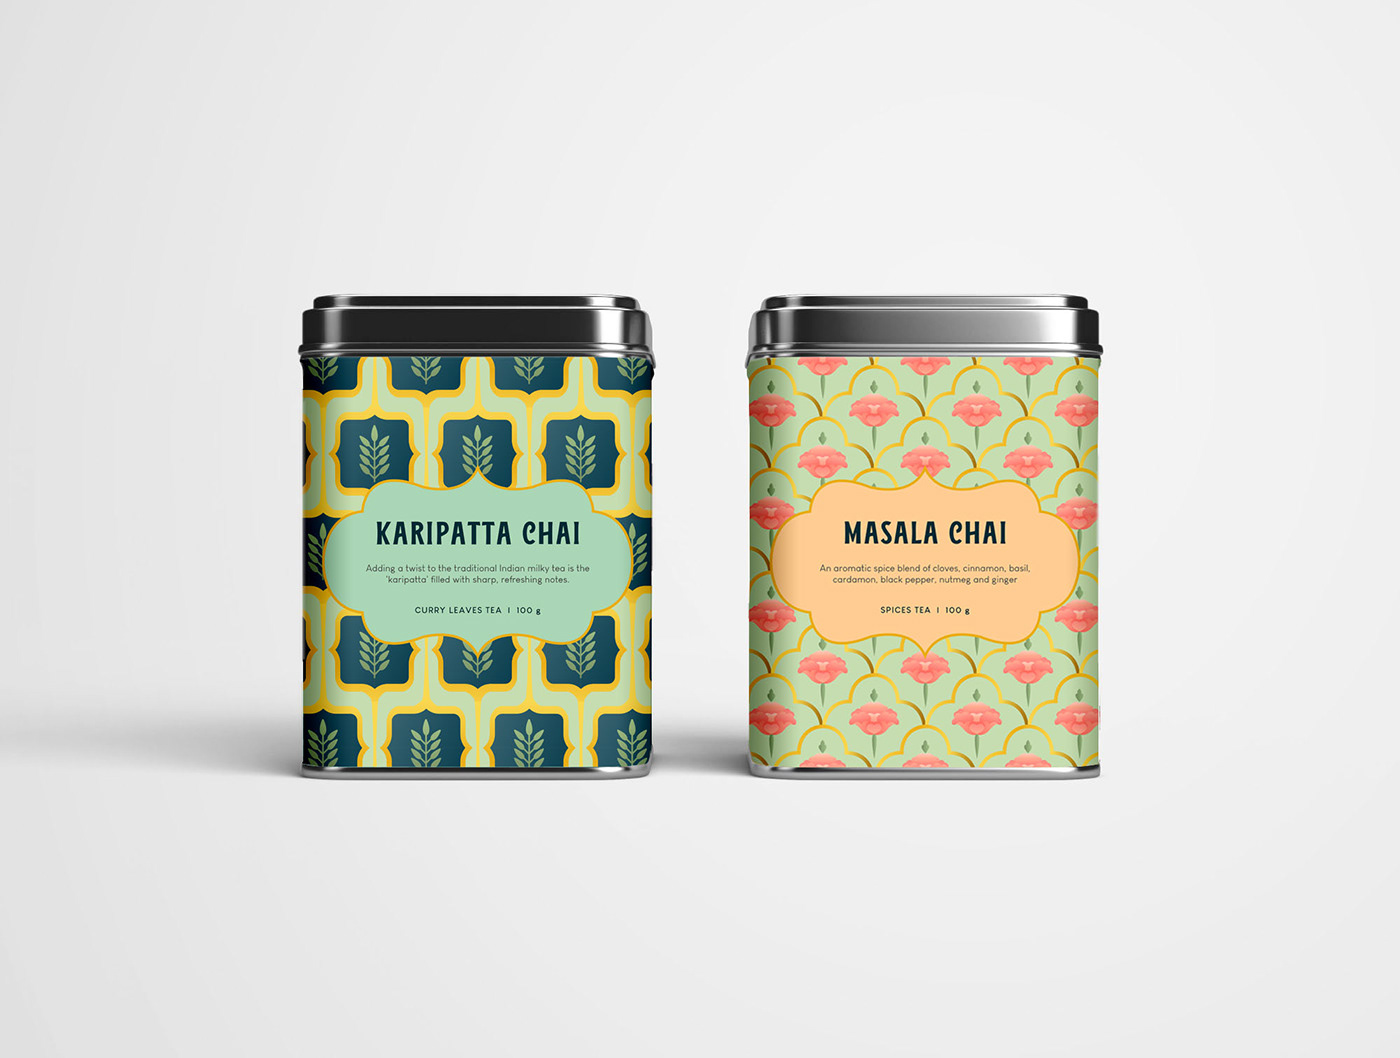 branding  graphic design  illustrations indian spice house product packaging Spice Packaging Tea Packaging